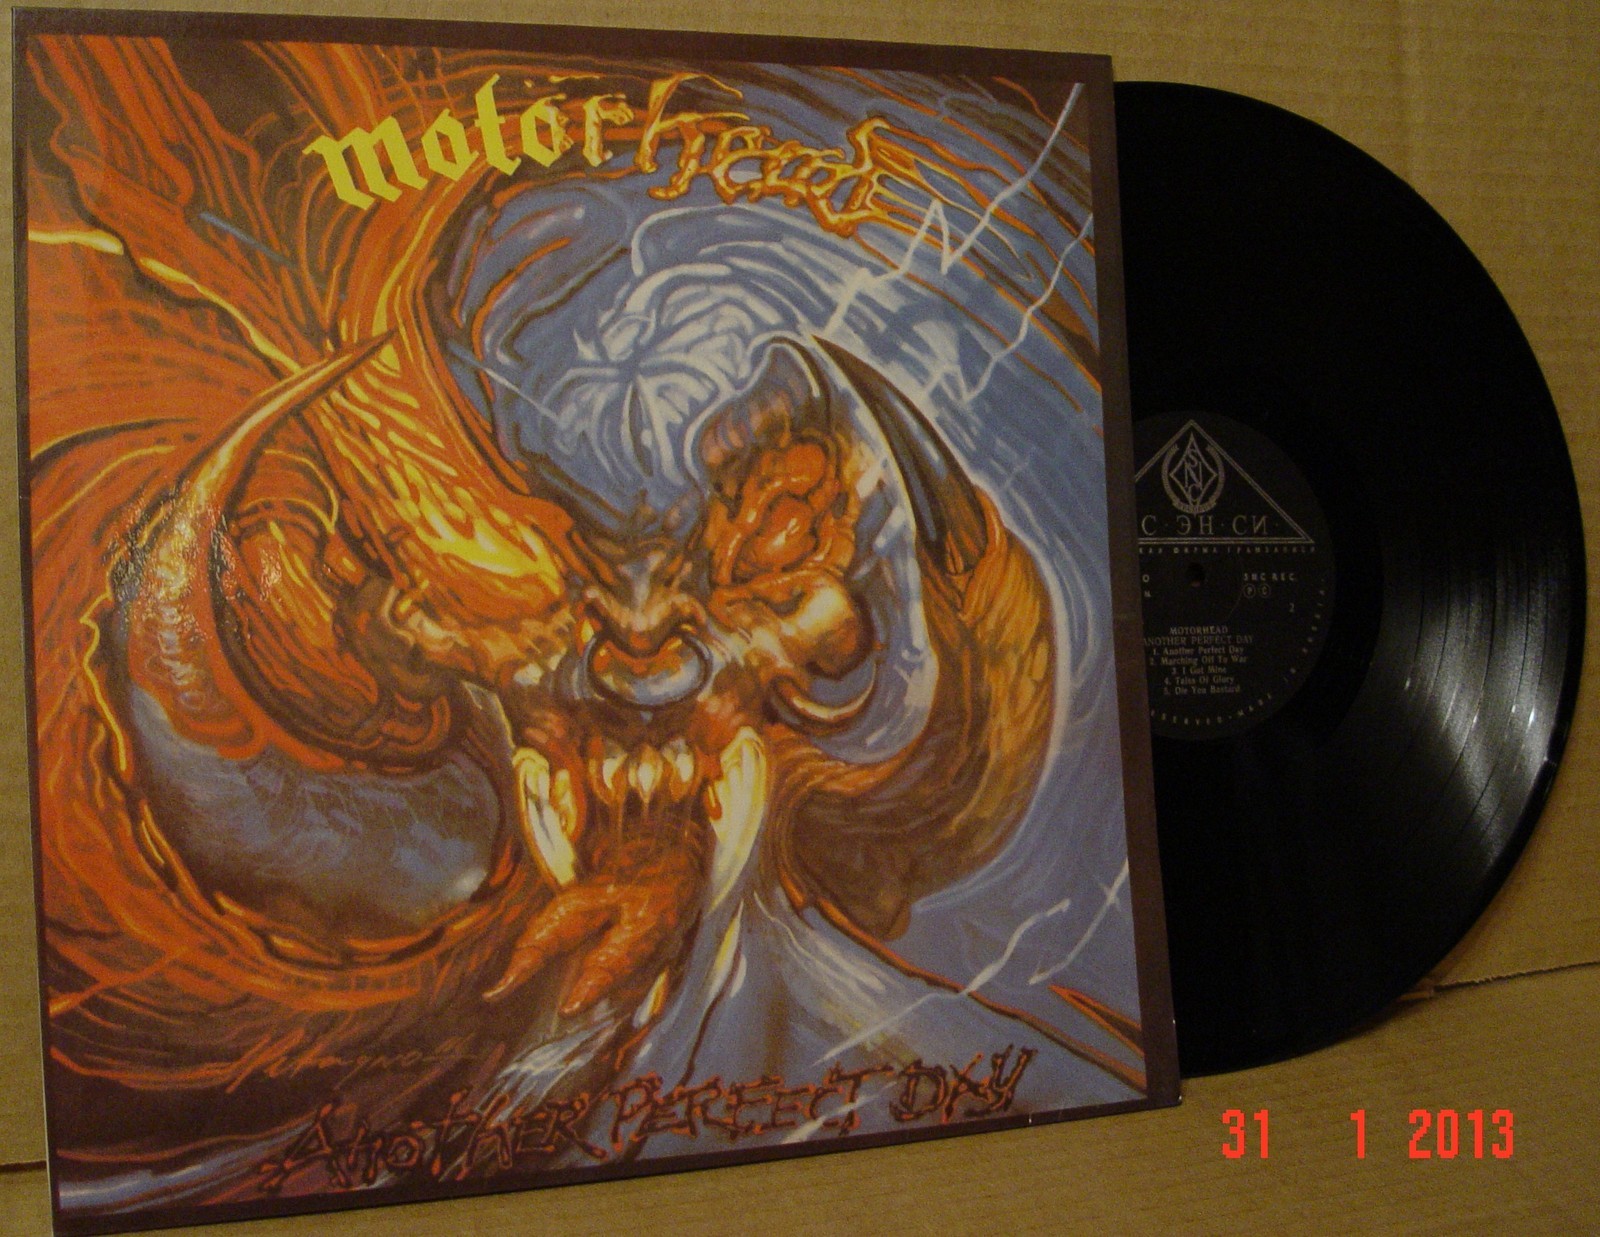 Motorhead. "Another Perfect Day"